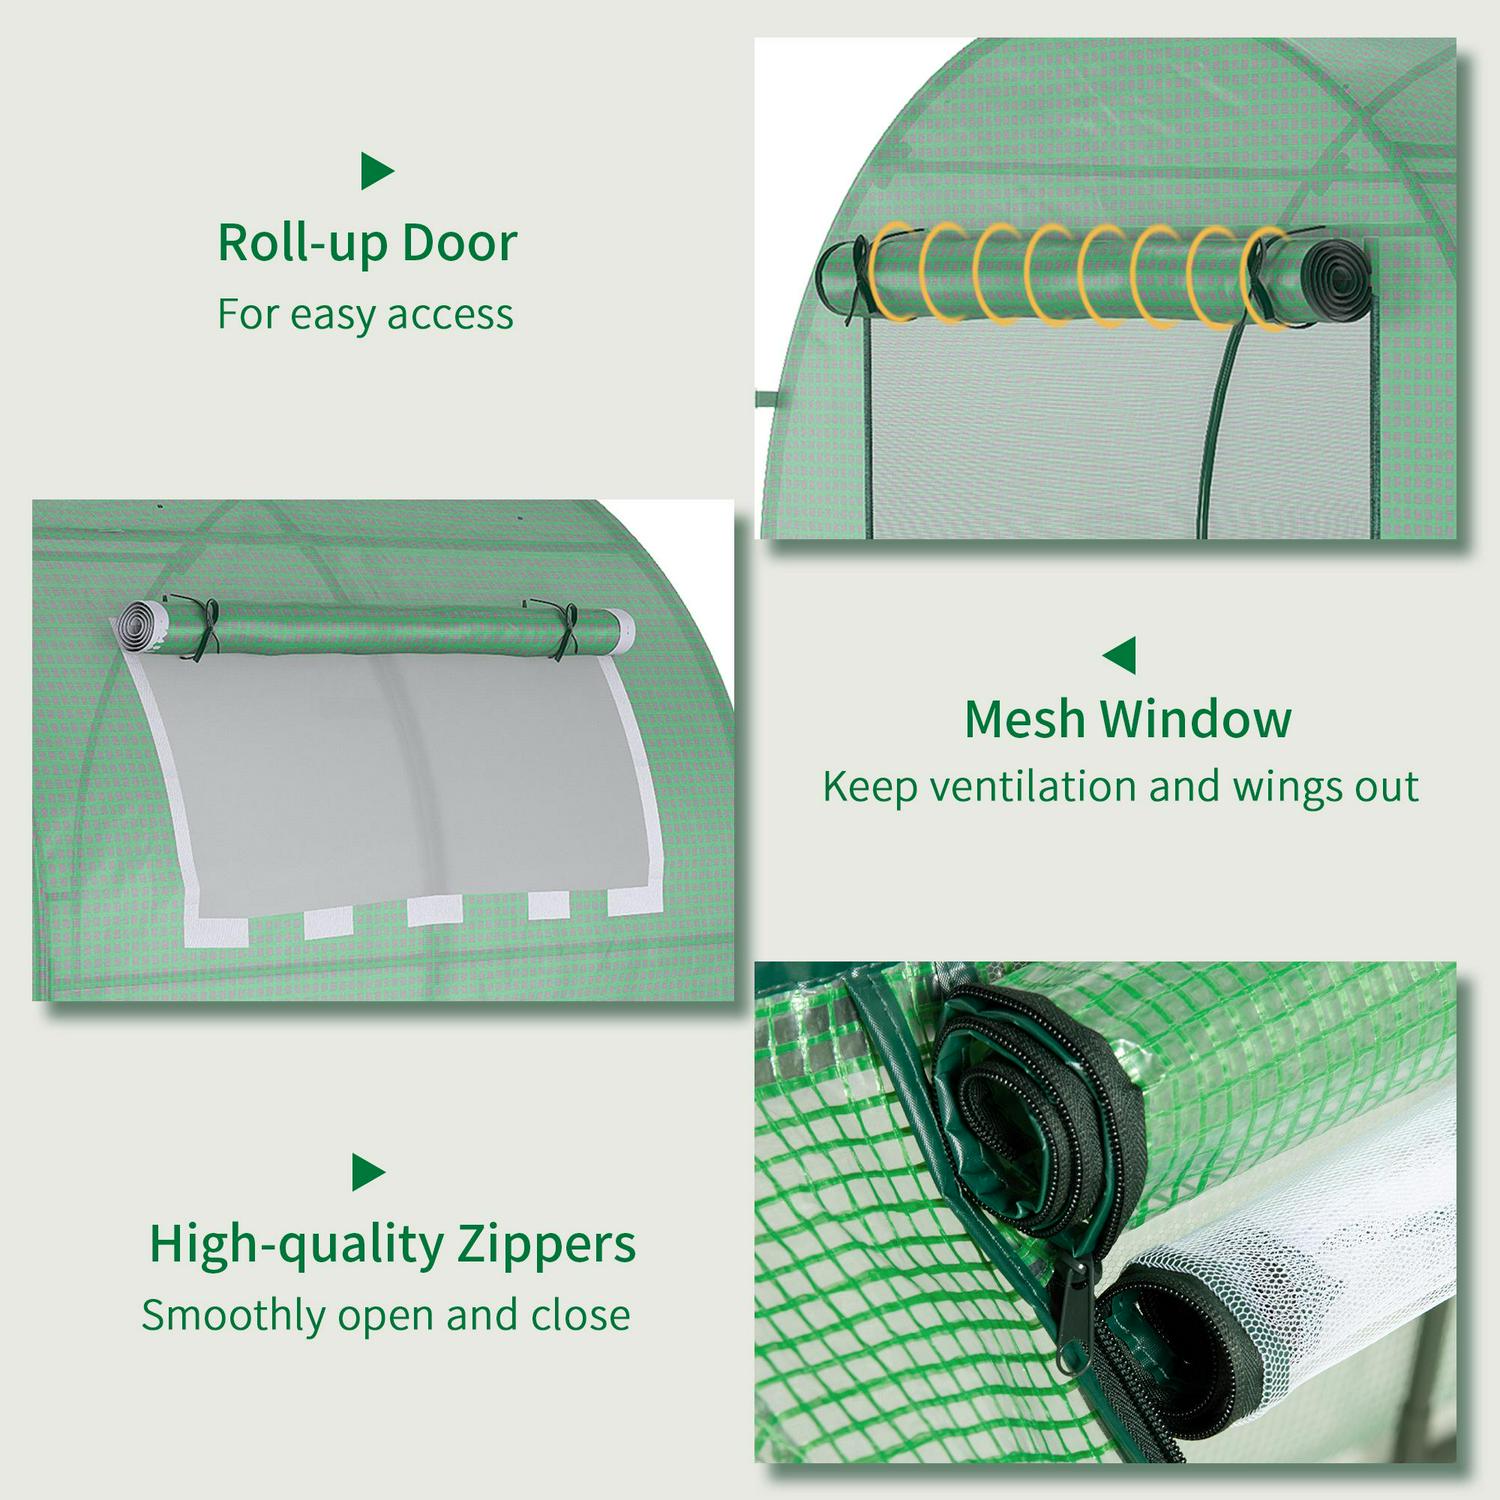 Walk In Polytunnel Greenhouse, For Garden With Roll-up Window And Door,(1.8 X 1.8 X 2) m, Green